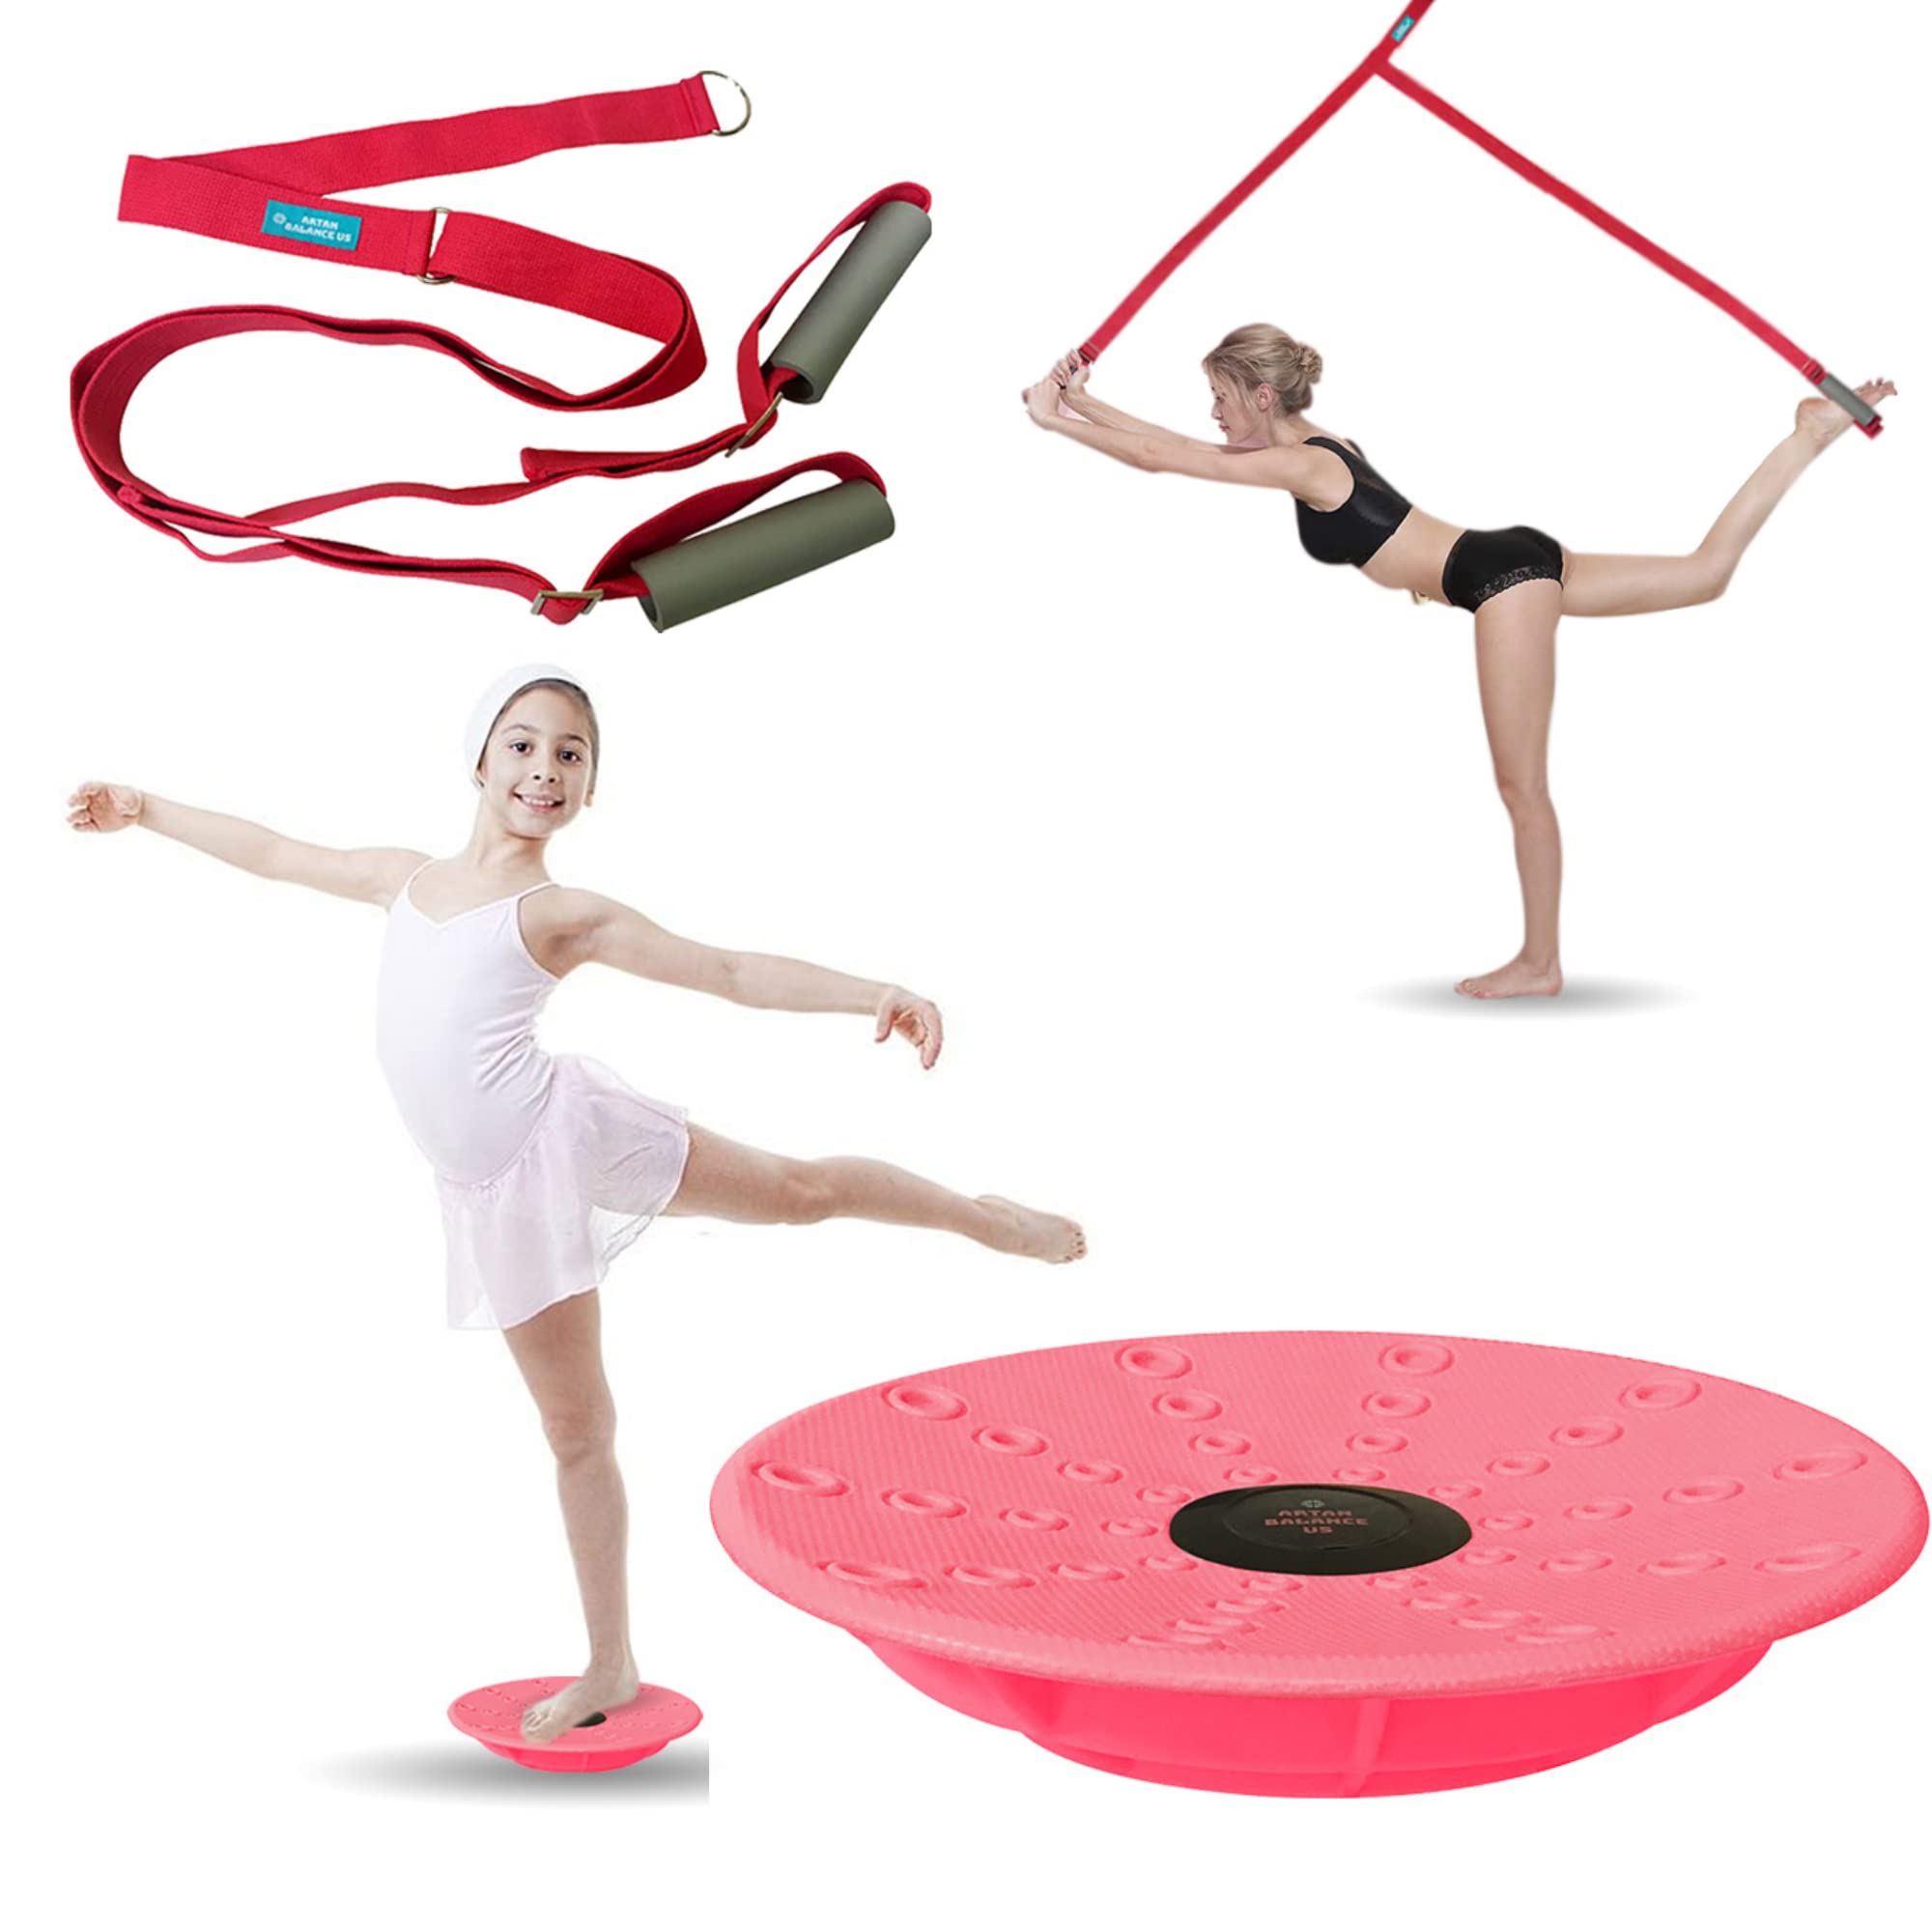 Professional Ballet Barres and other Dance and Sport Equipment – ArtAn  Ballet